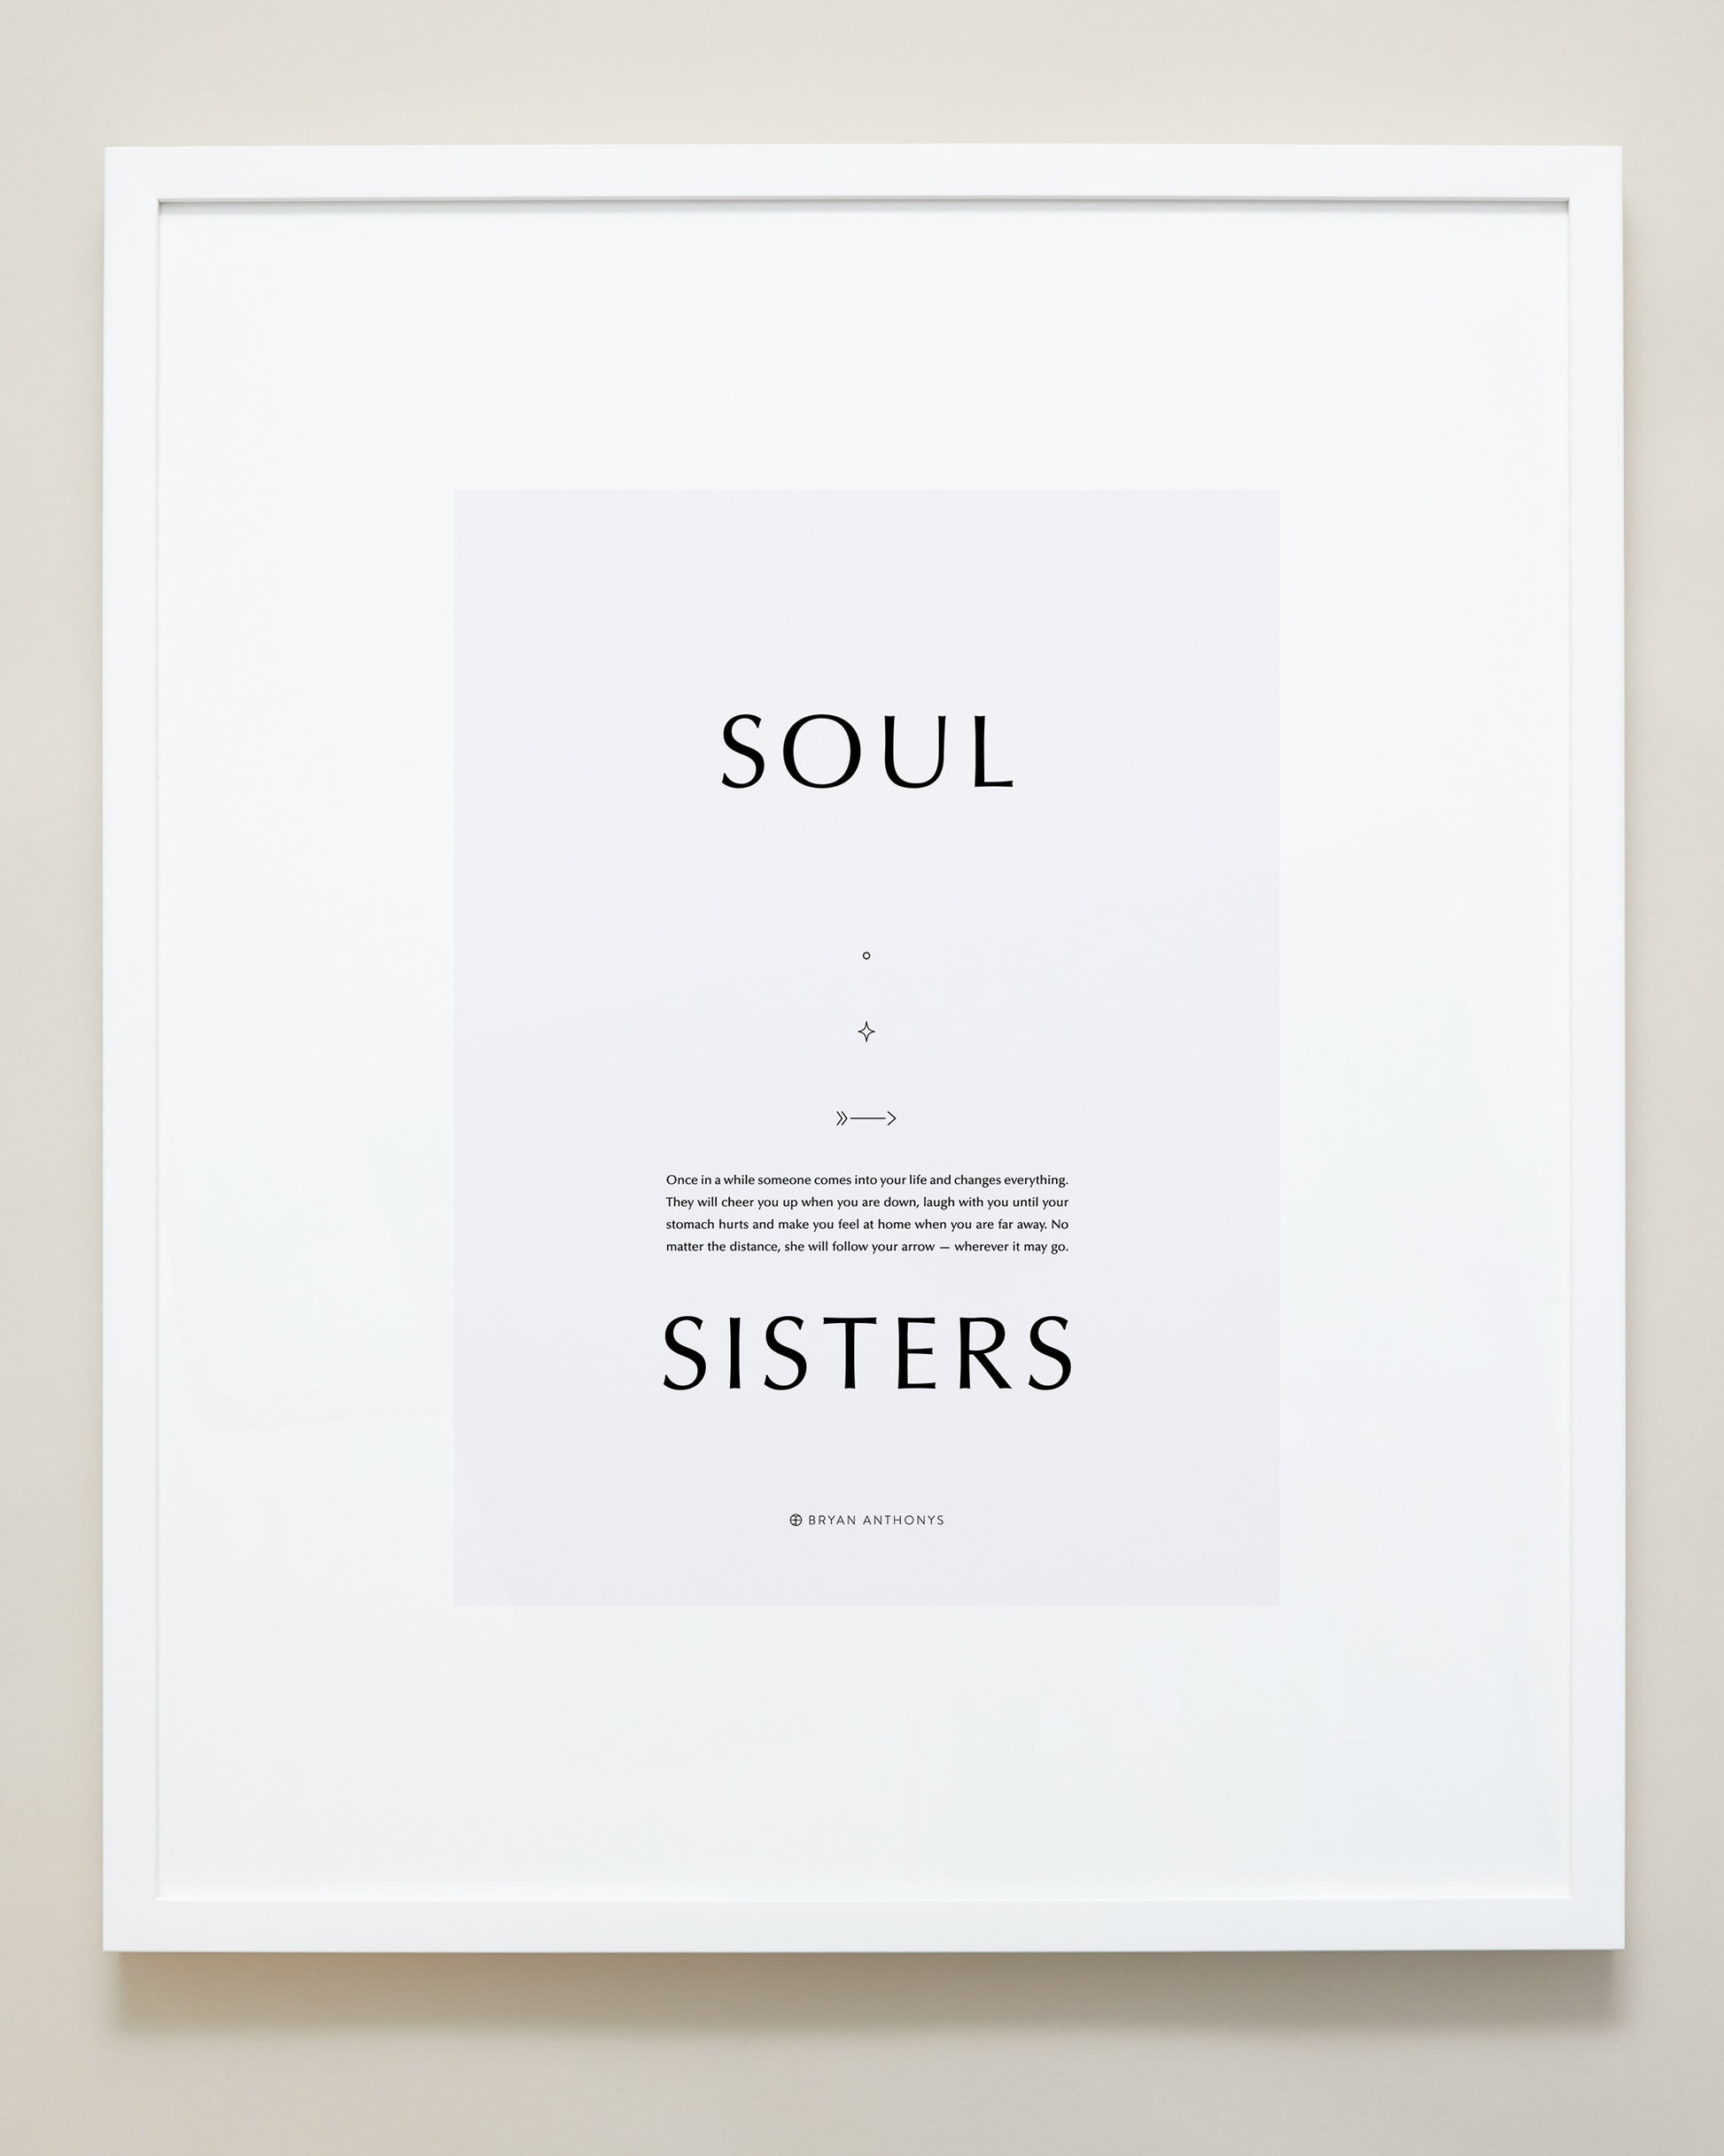 Bryan Anthonys Home Decor Purposeful Prints Soul Sisters Iconic Framed Print Gray Art with White Frame 20x24